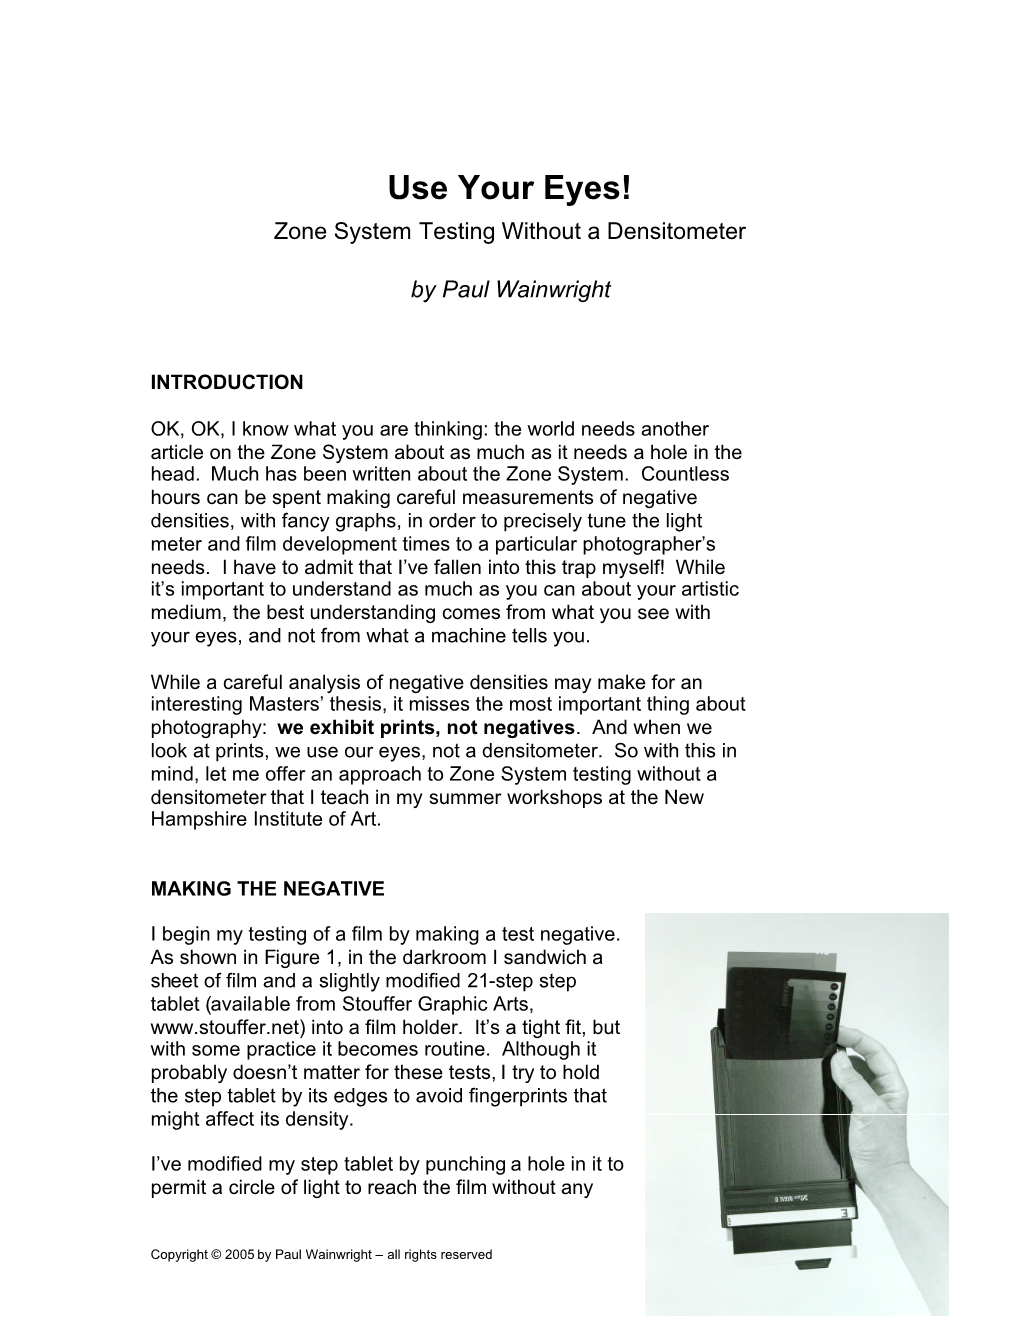 Use Your Eyes! Zone System Testing Without a Densitometer